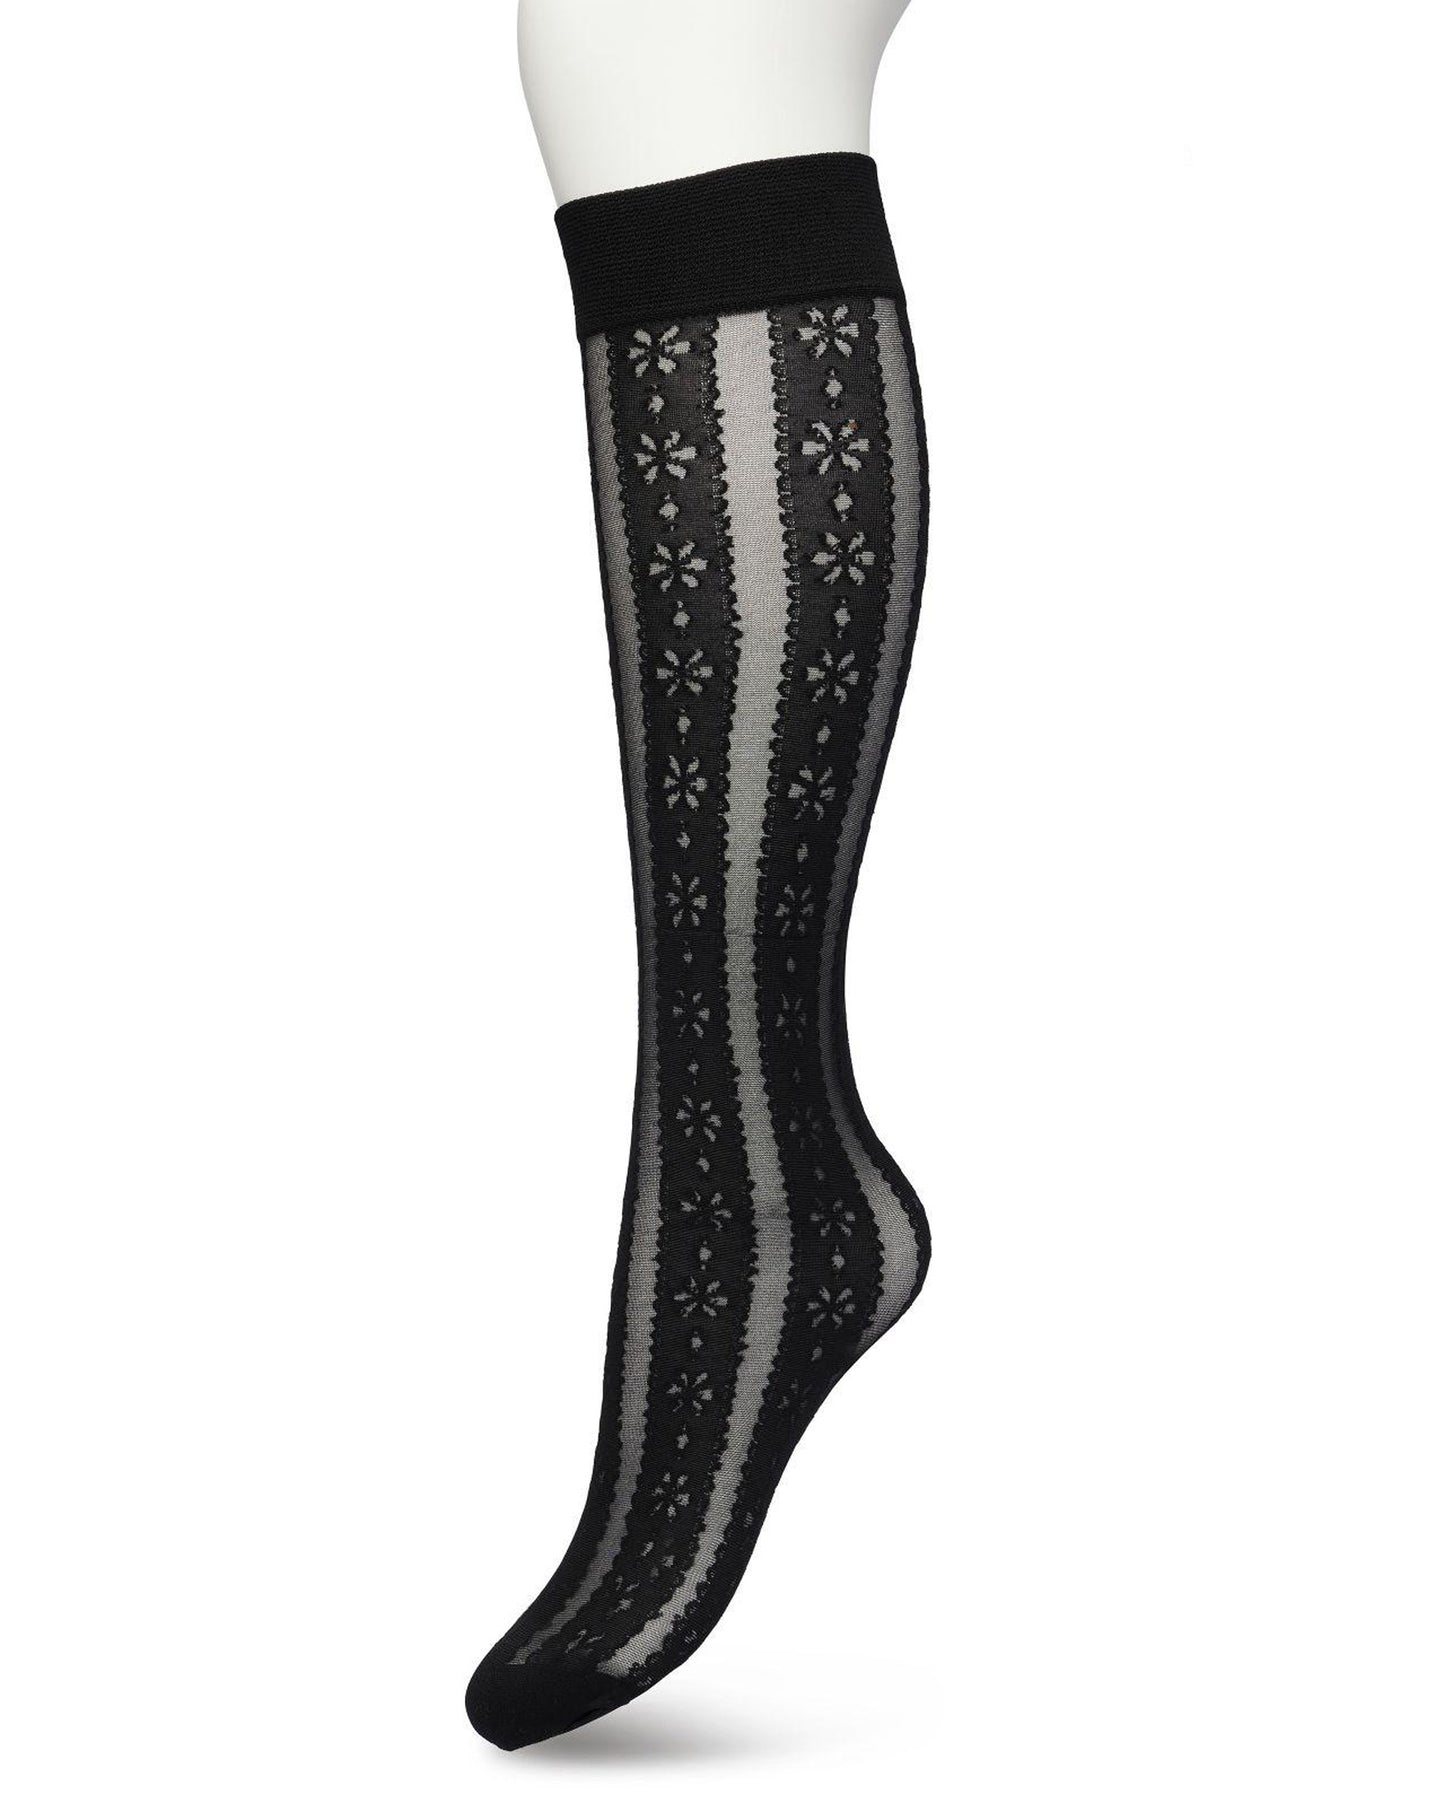 Bonnie Doon Flower Stripe Knee-Highs - Black fashion knee-high socks with a vertical stripe pattern with a flower and dot design with scalloped edge, reinforced toe and deep elasticated comfort cuff